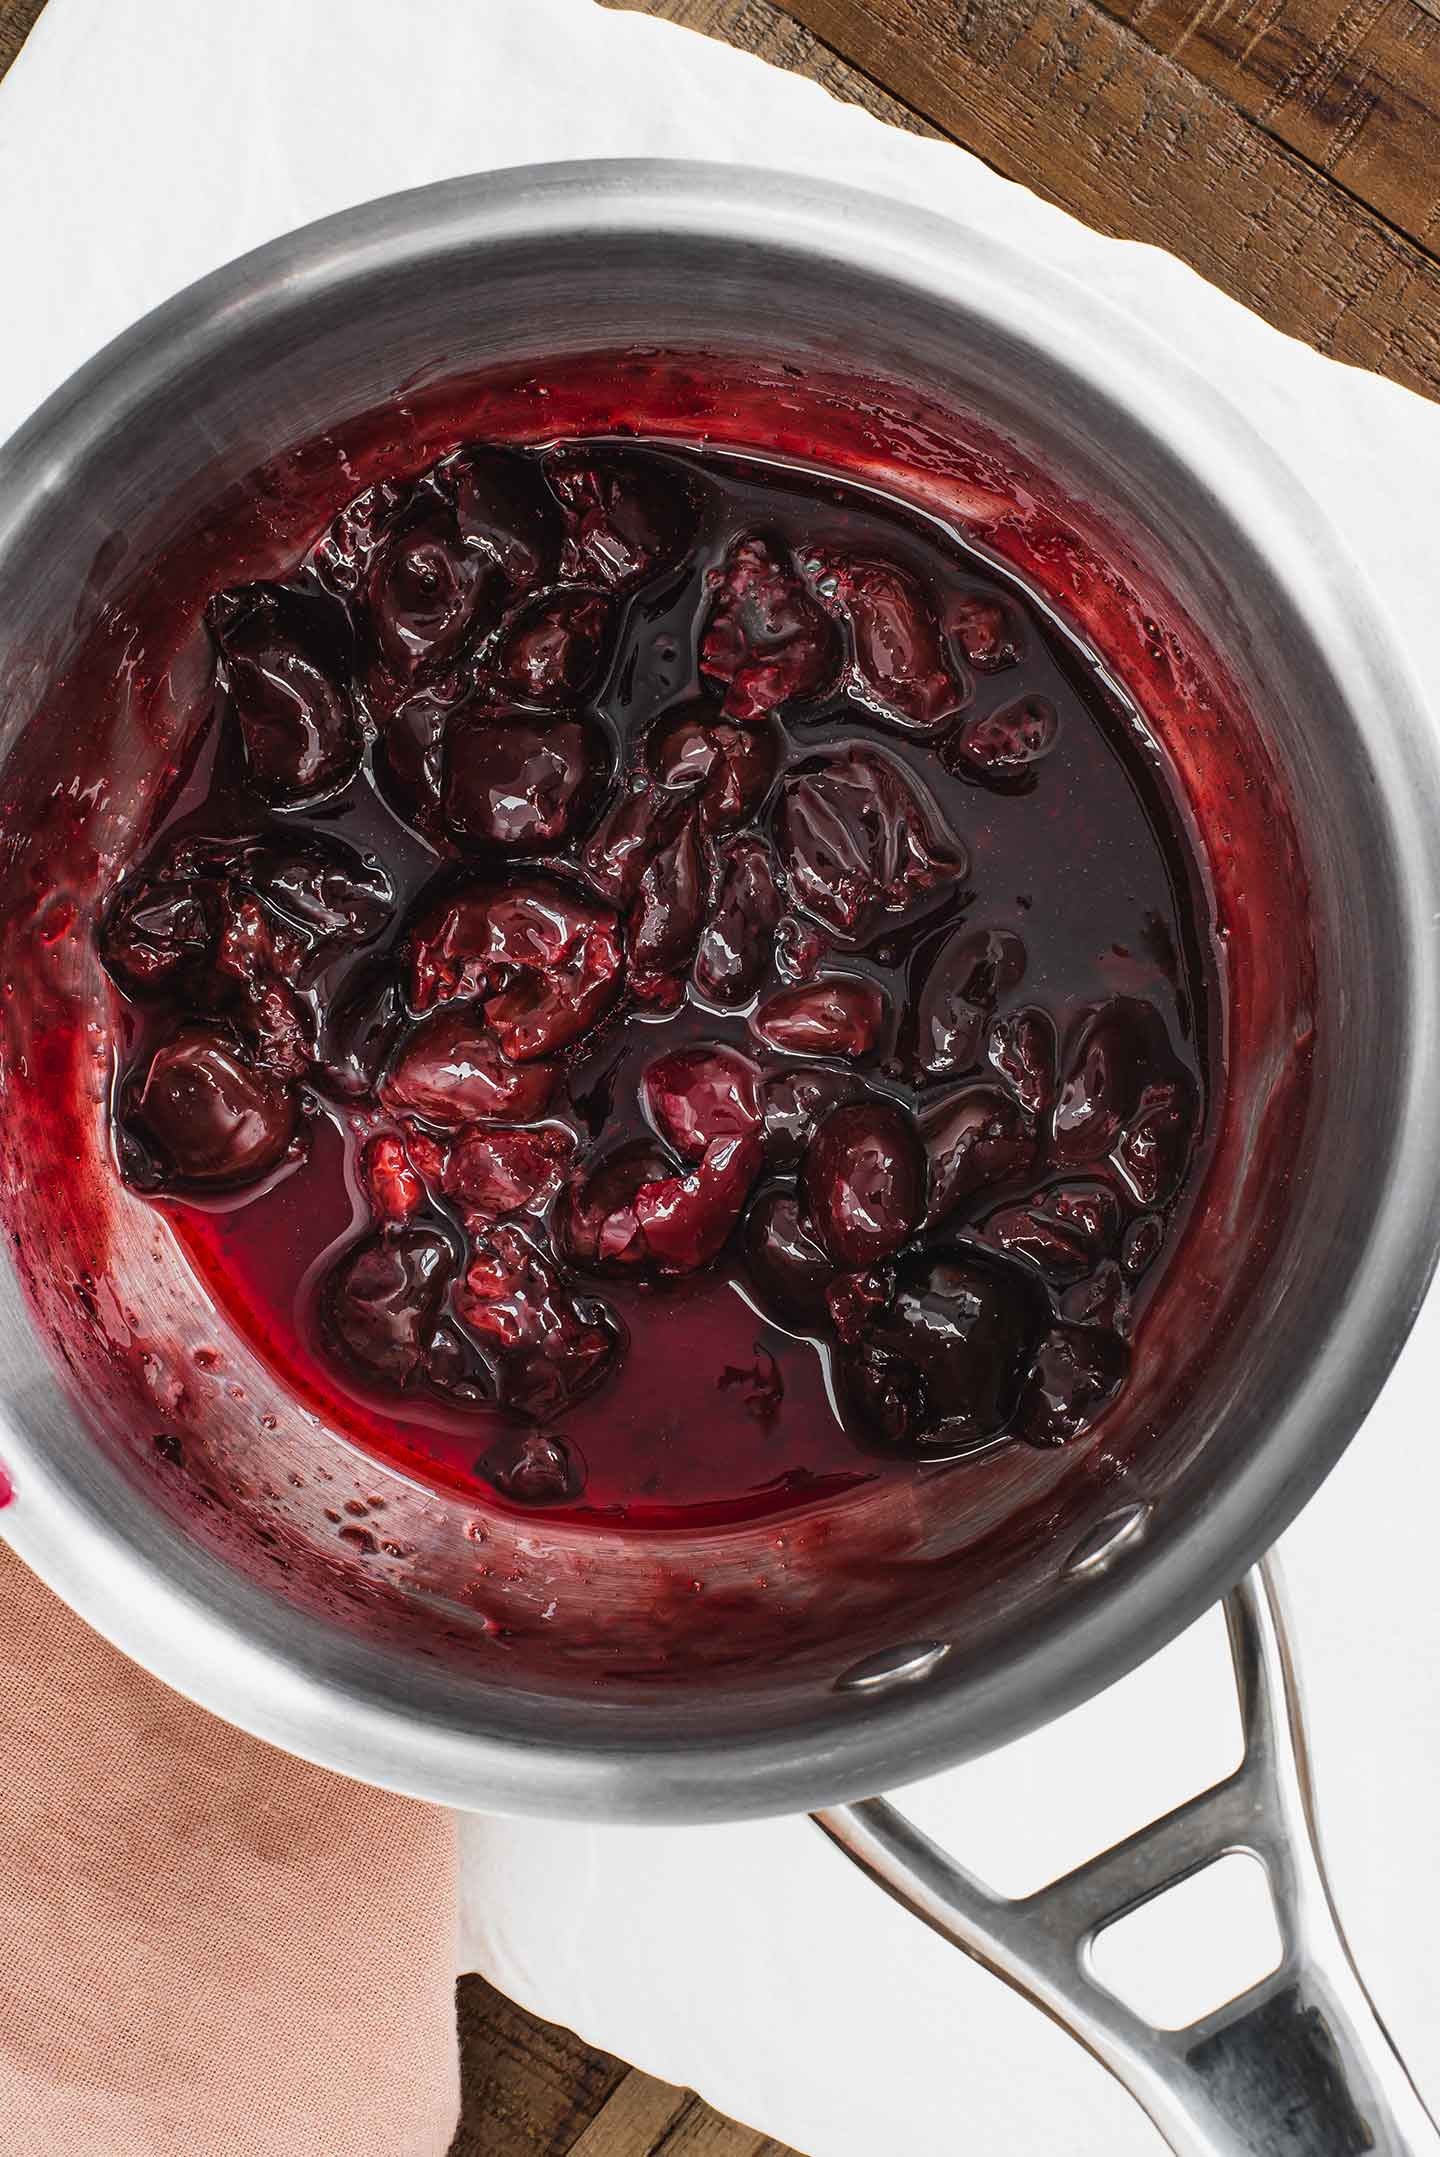 Top down view of a thickened cherry sauce in a small pot. The cherries are lightly crushed and the sauce is a deep purple colour.